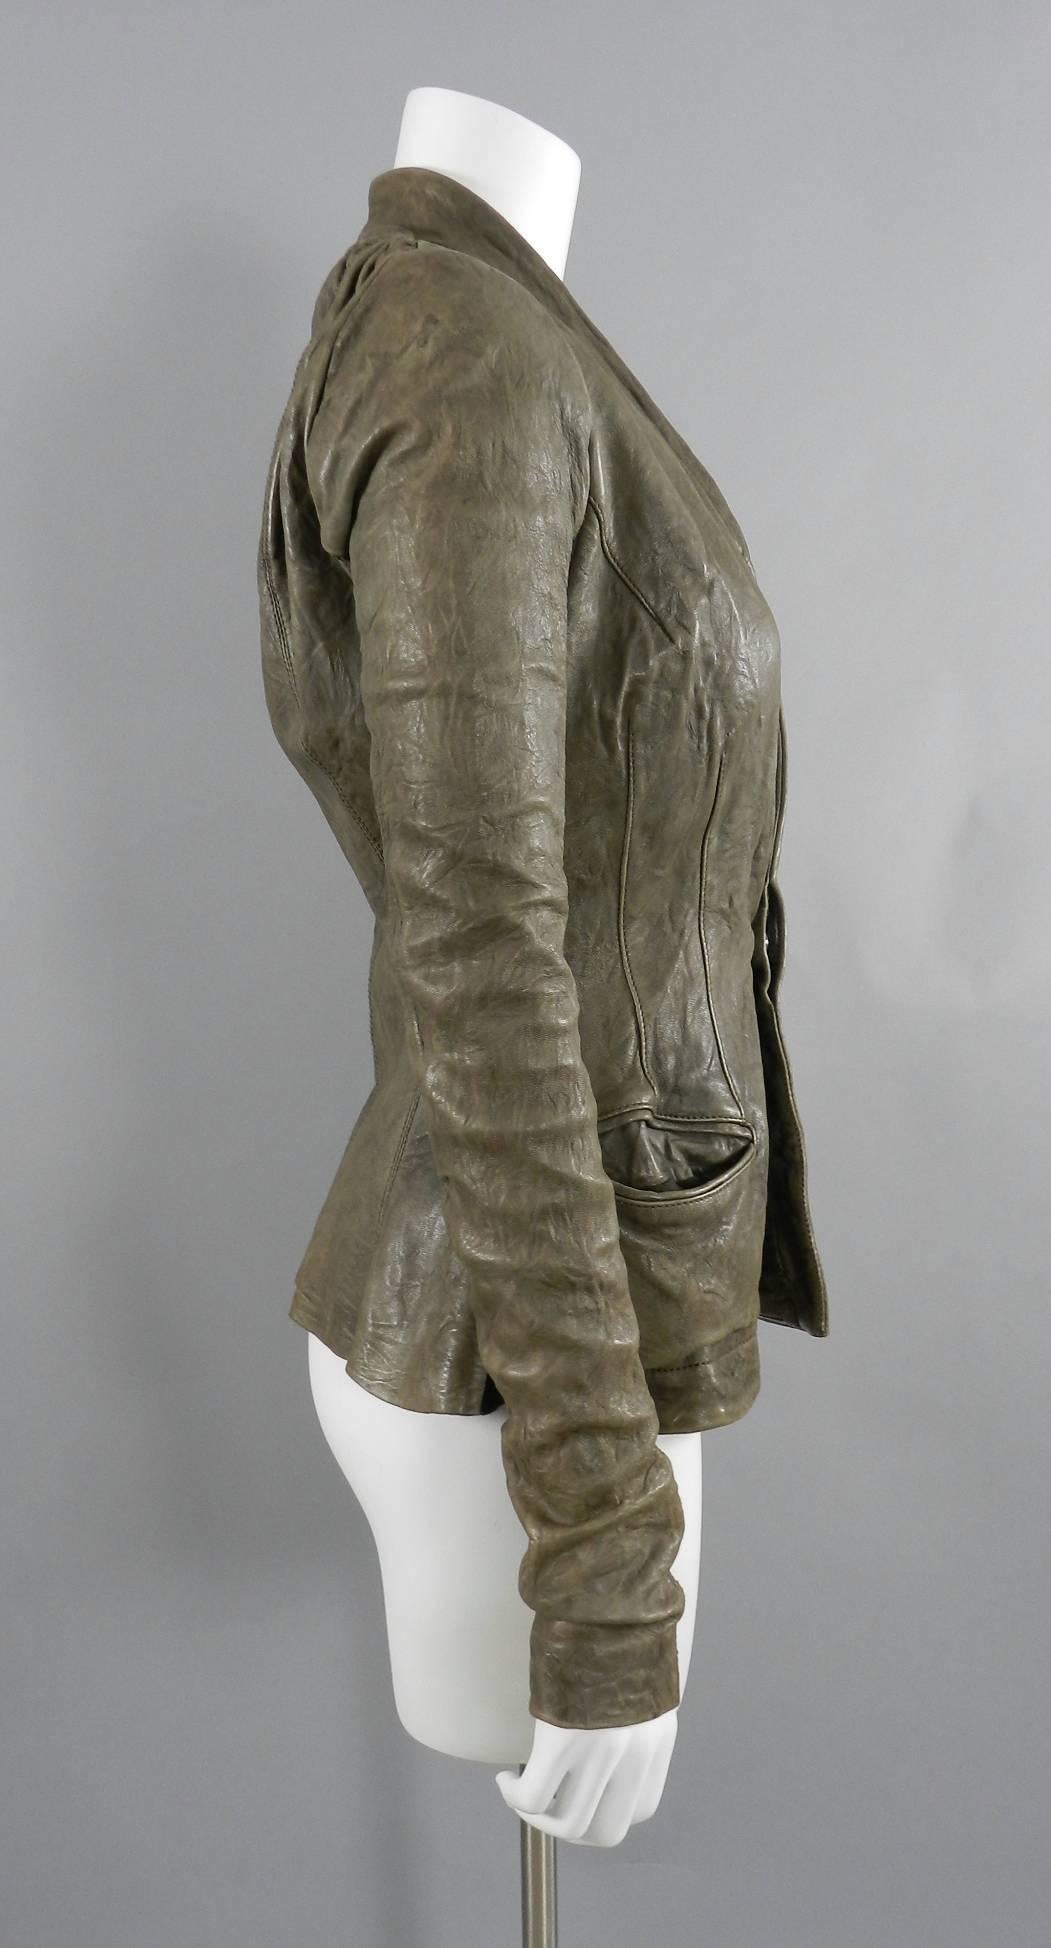 Rick Owens taupe distressed leather jacket. Jacket features extra long half knit sleeves that are worn gathered, fitted waistline, and side hip pockets.  Distressed wrinkled washed leather. Excellent pre-owned condition with about 1